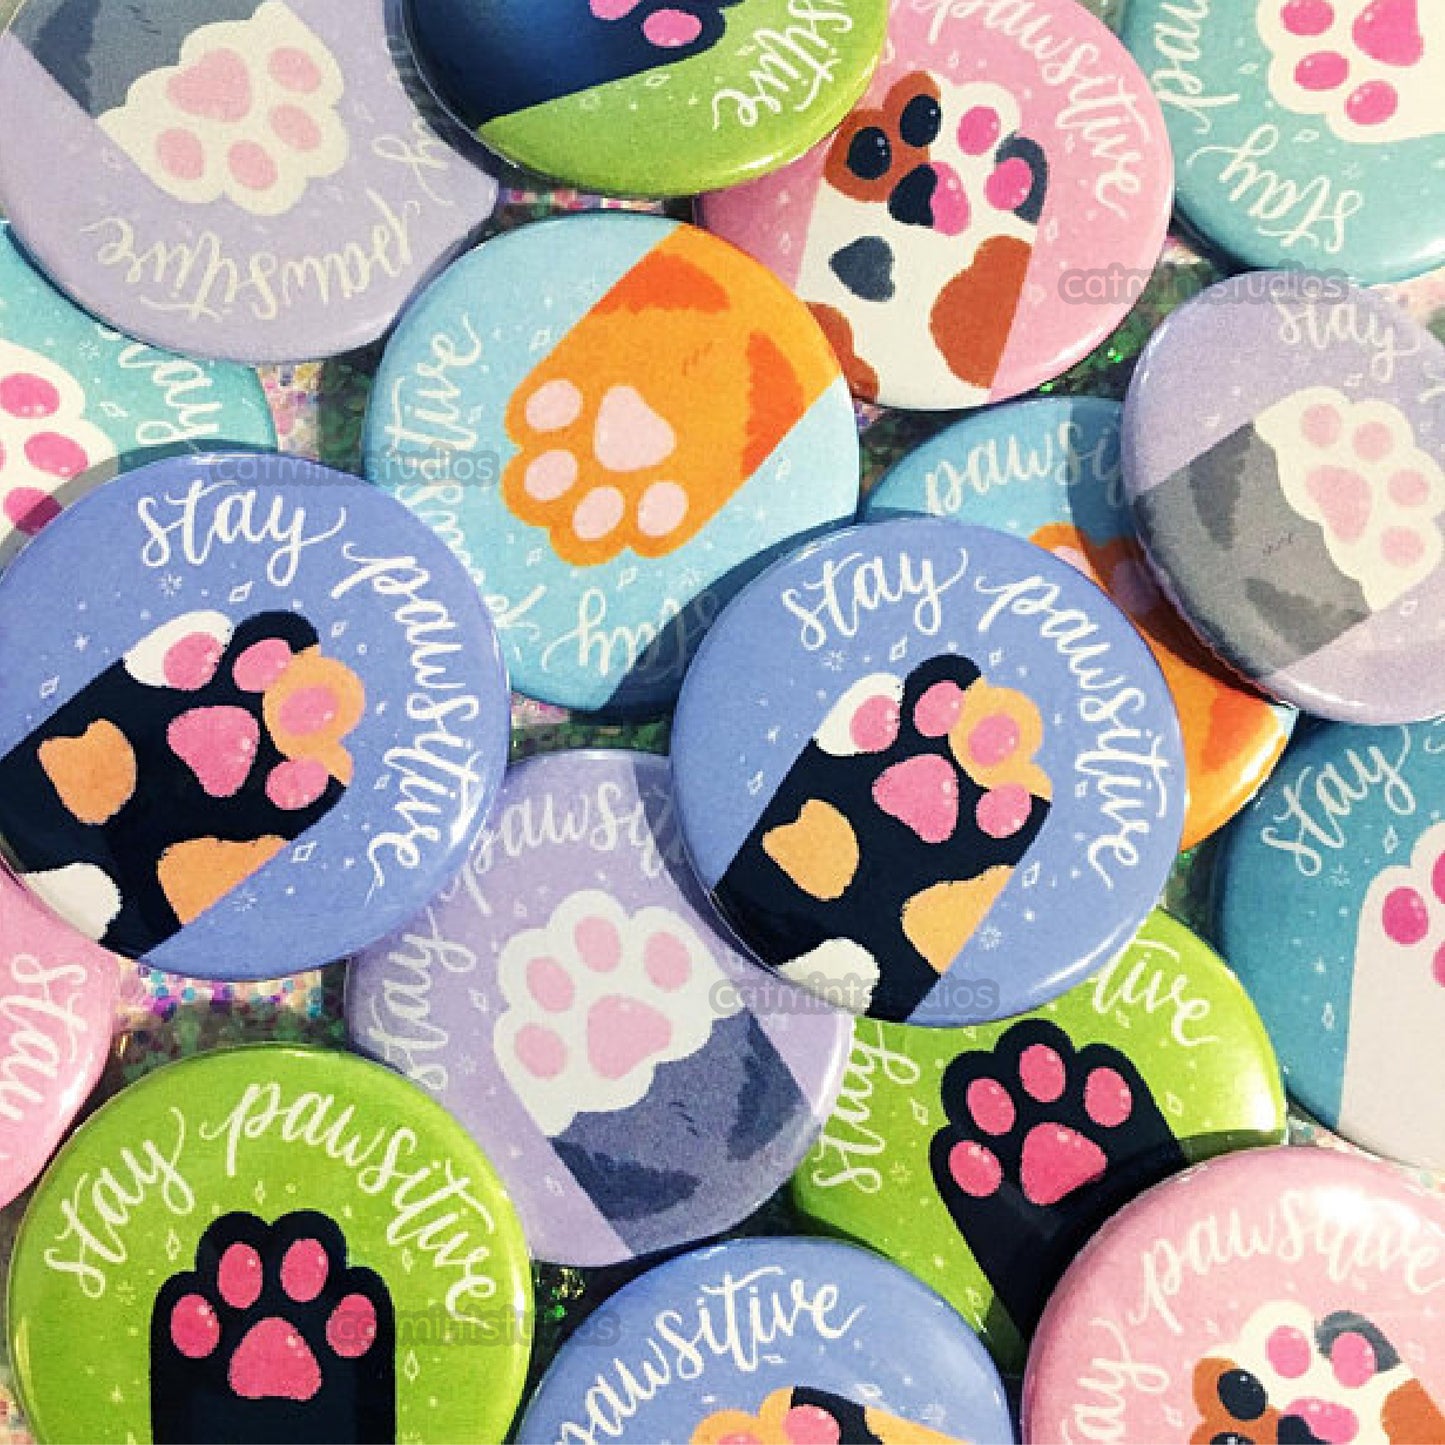 Stay Pawsitive Buttons